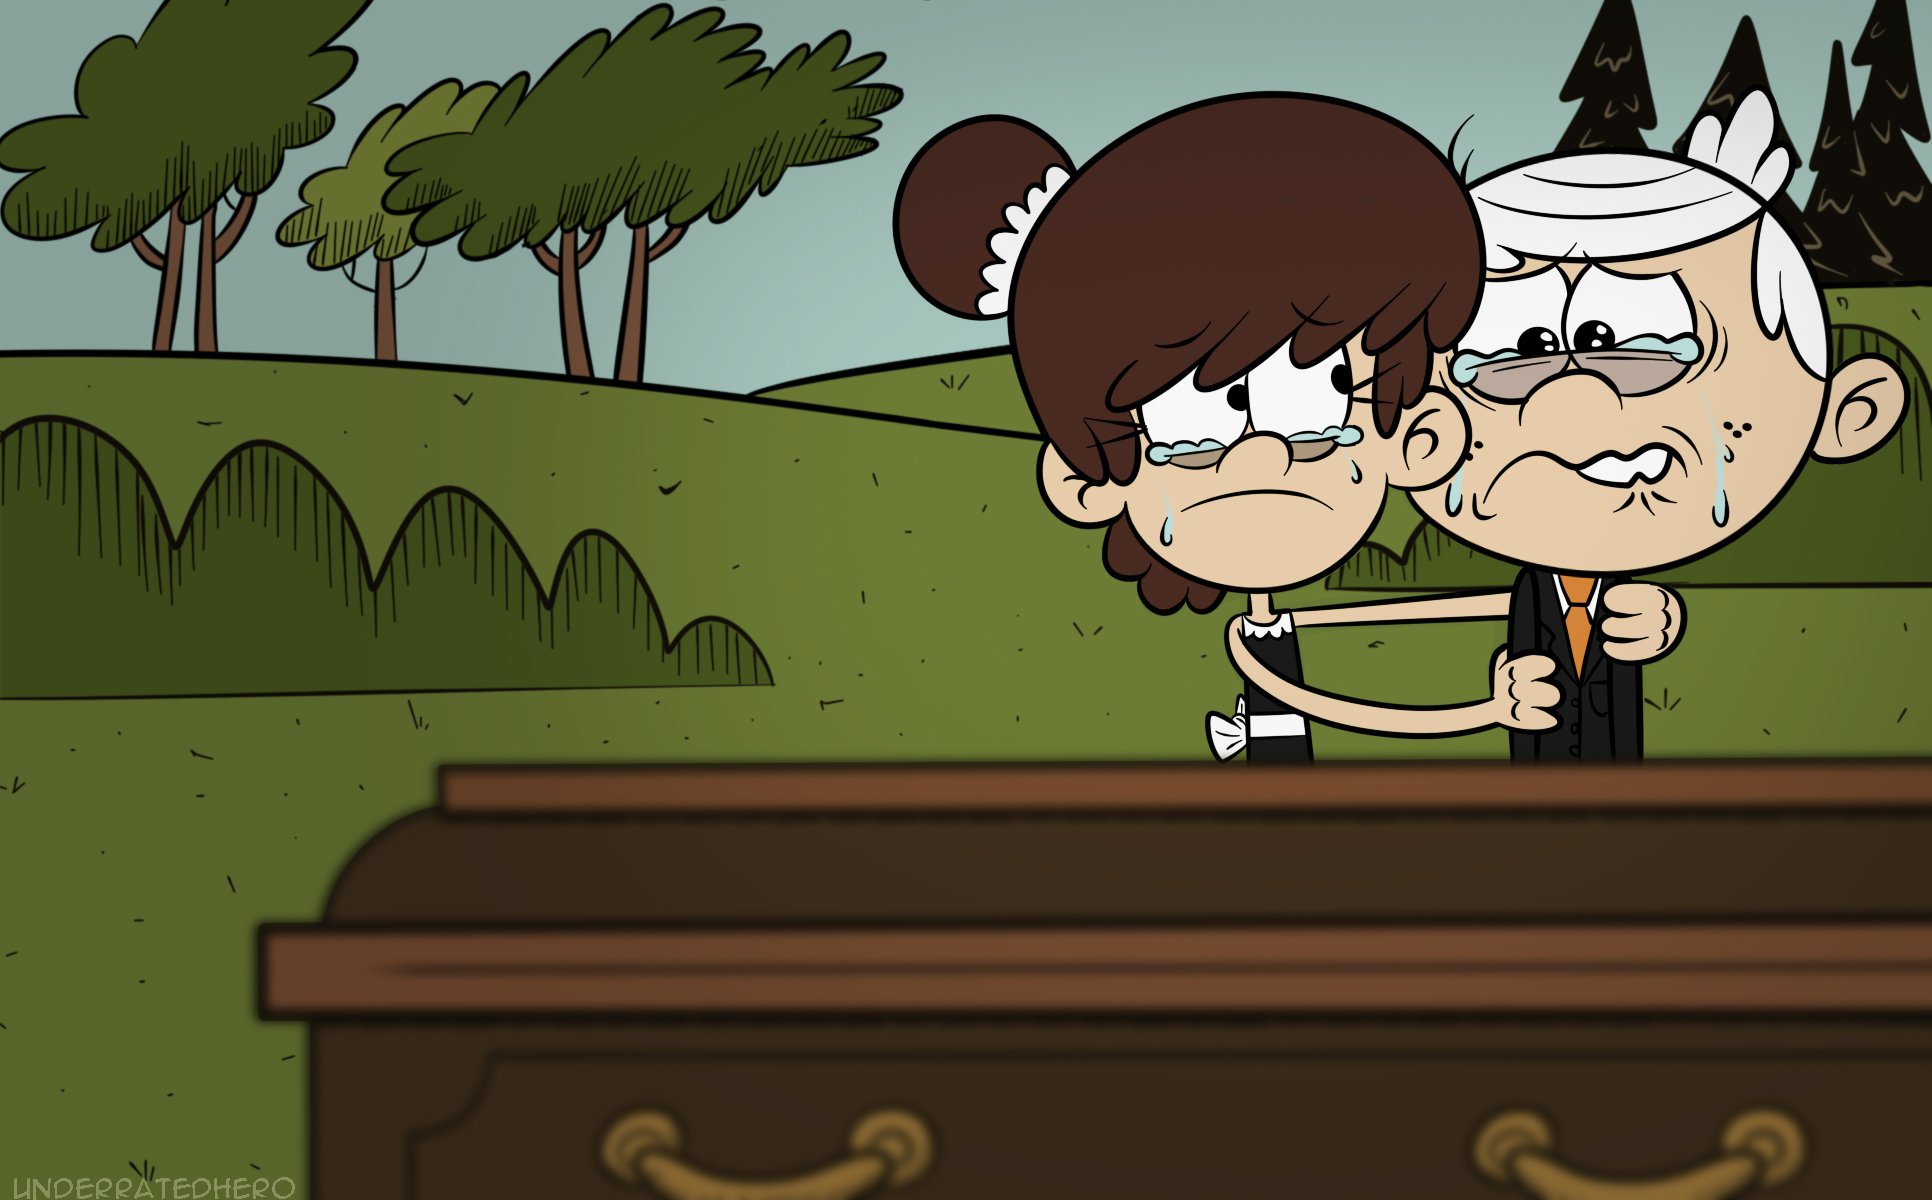 “Day 28 - Death

#LynnLoud #LincolnLoud #TheLoudHouse” .